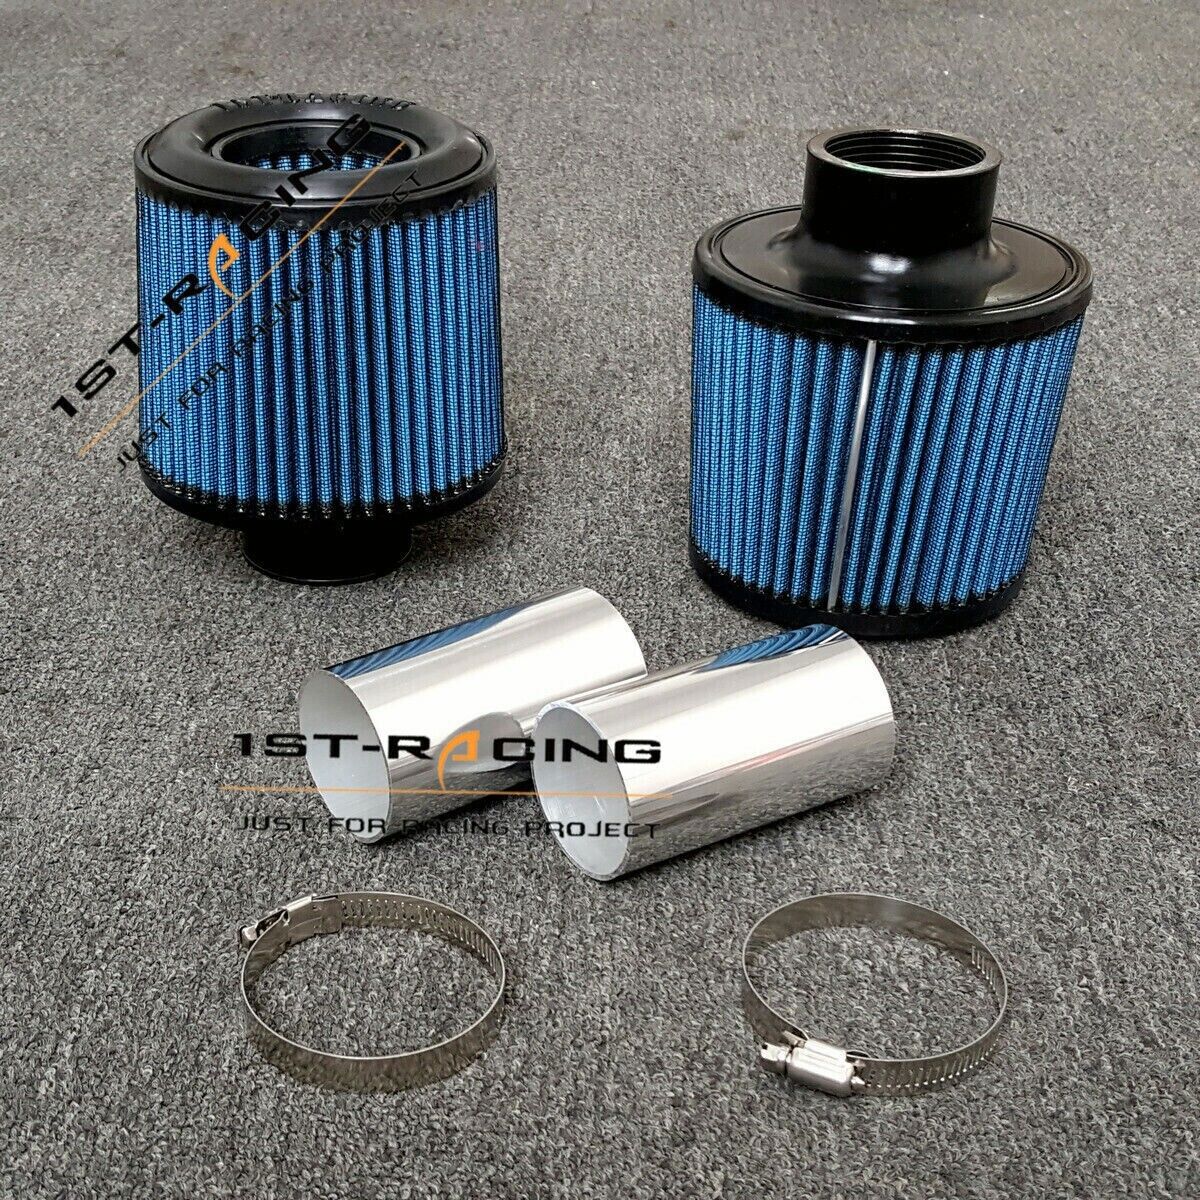 Dual Cone Filter Air Intake Kit for BMW 135i 335i 335xi 335is 535i 3.0L N54 Blue